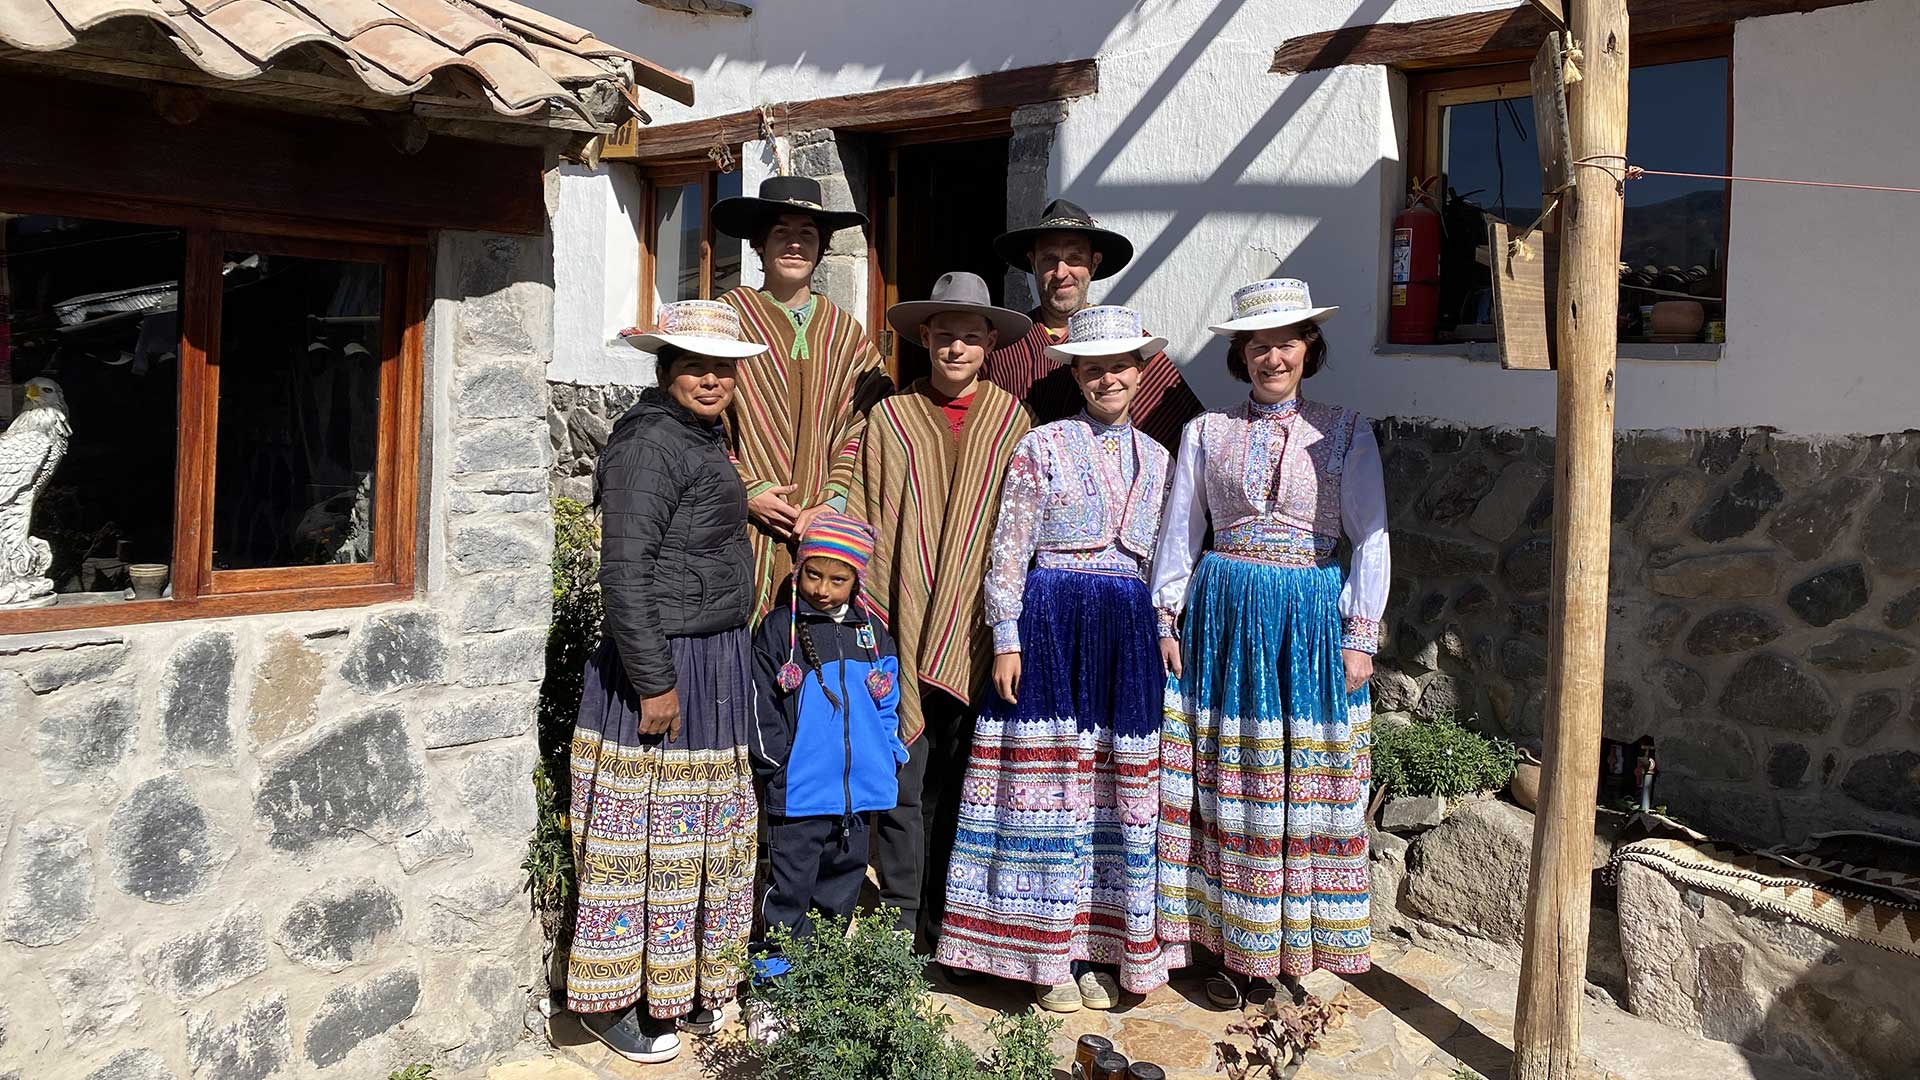 A family from the Netherlands wearing traditional costumes at a rural homestay in Coporaque, Colca, Arequipa, Peru next to their hosts